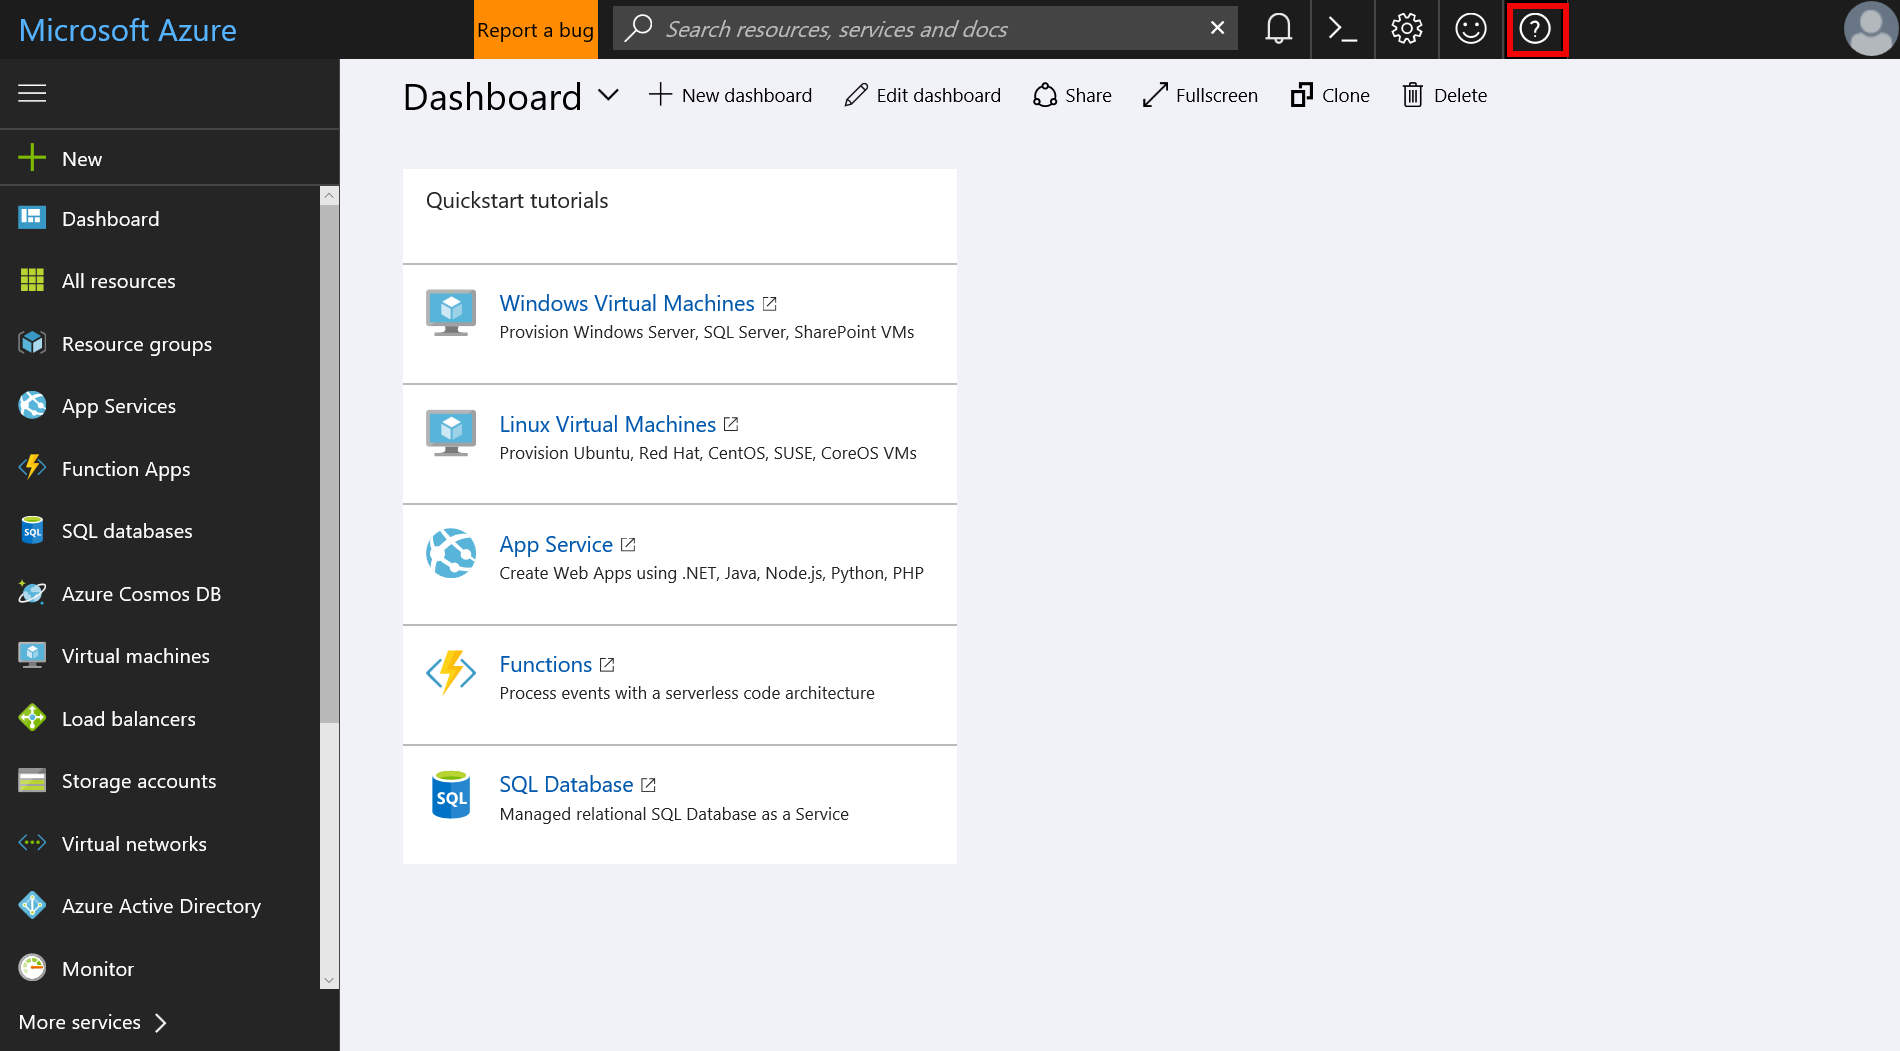 Contact support on Azure portal